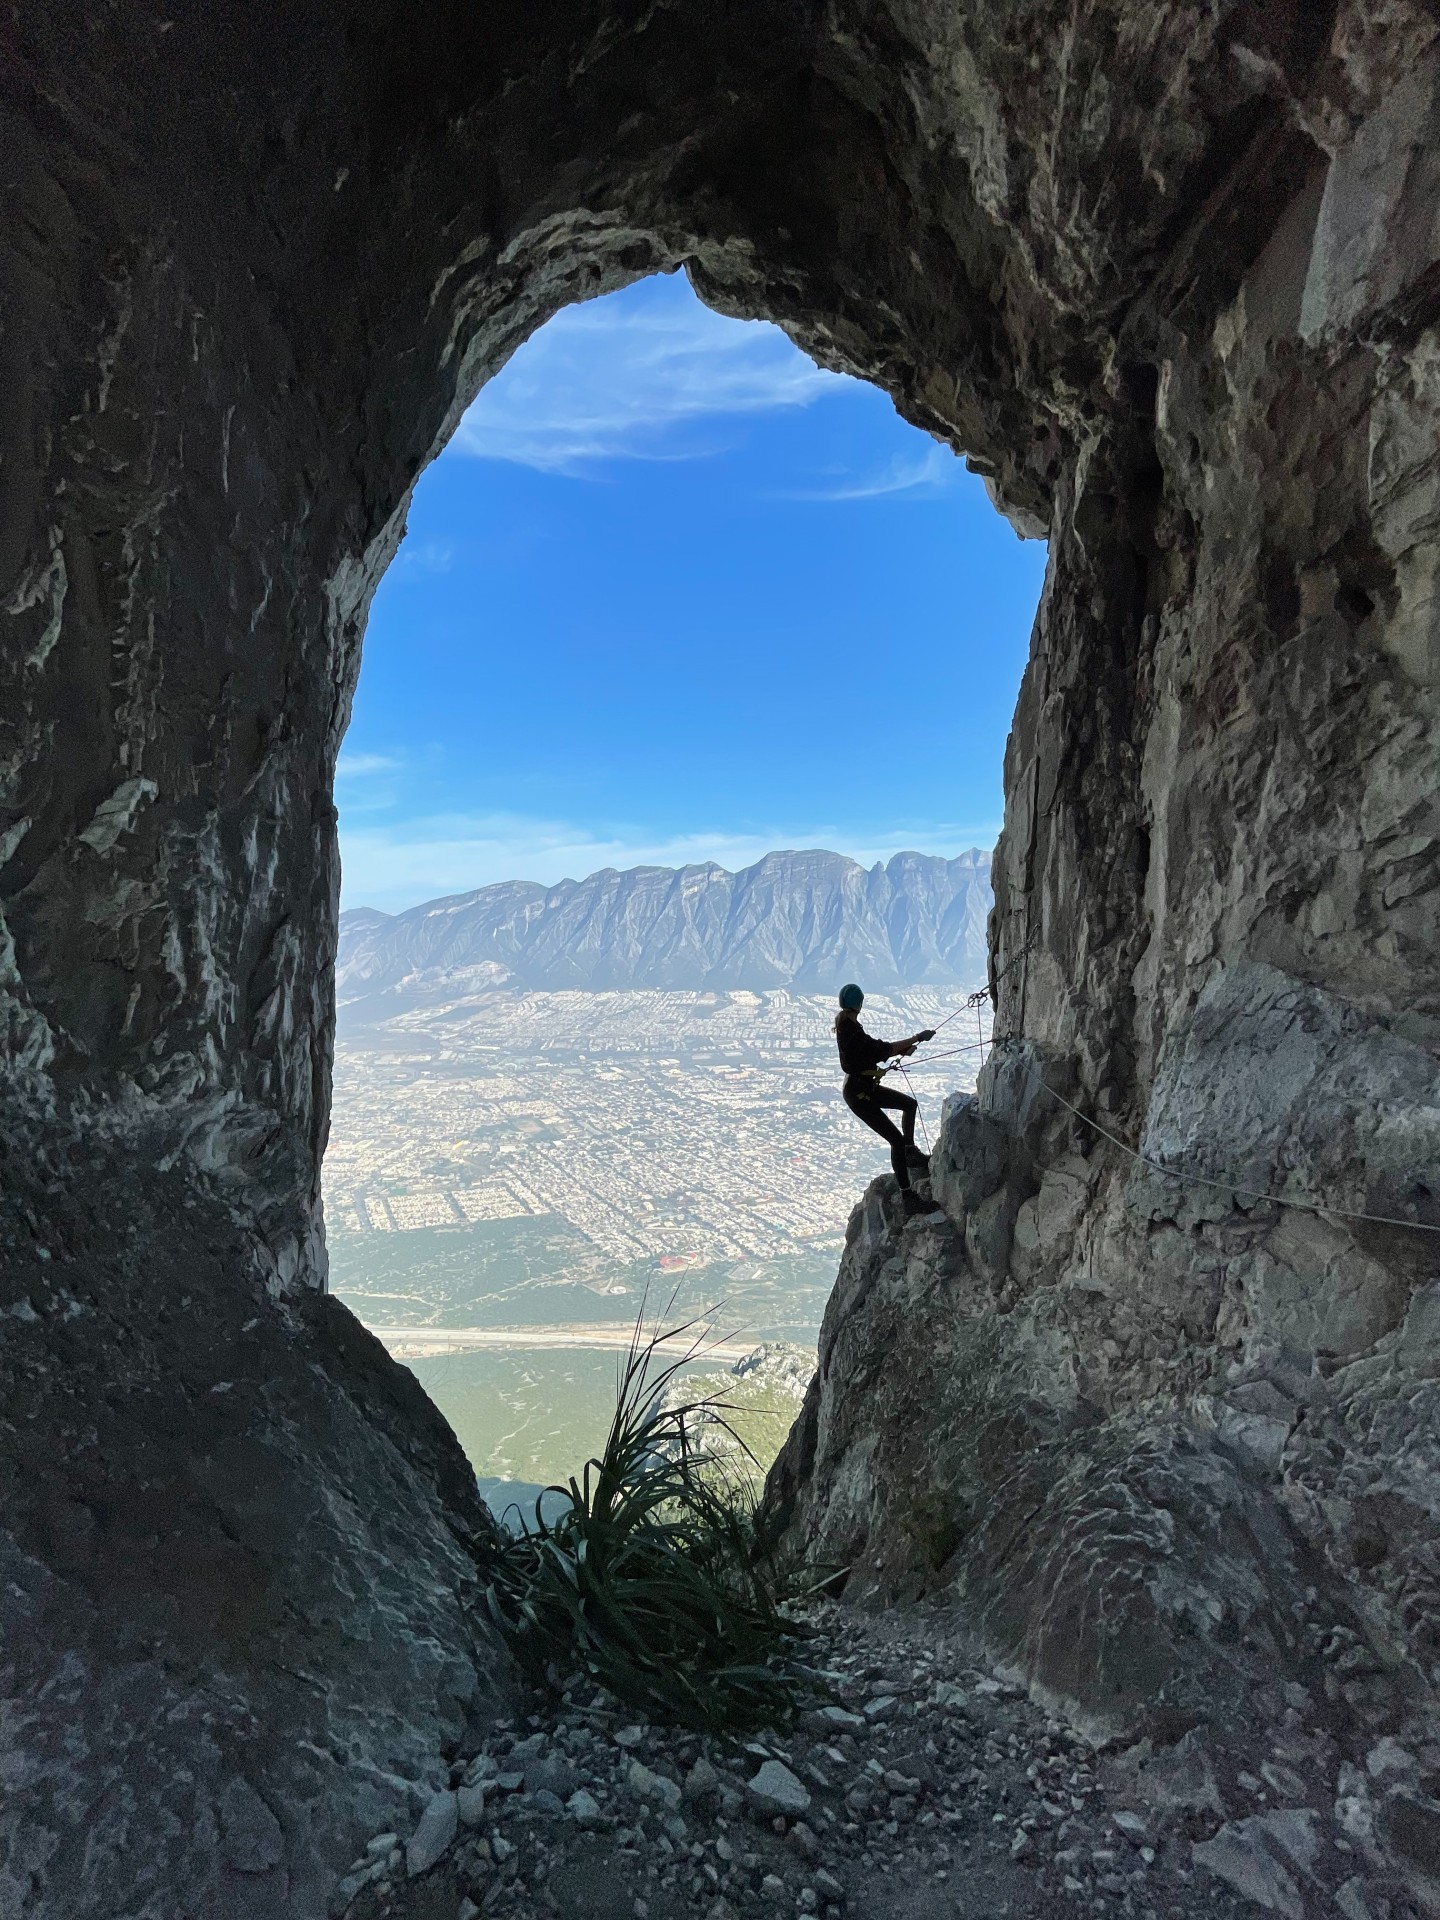 Travel guide to Monterrey, Mexico - Best hikes in Monterrey and how to plan your stay. 